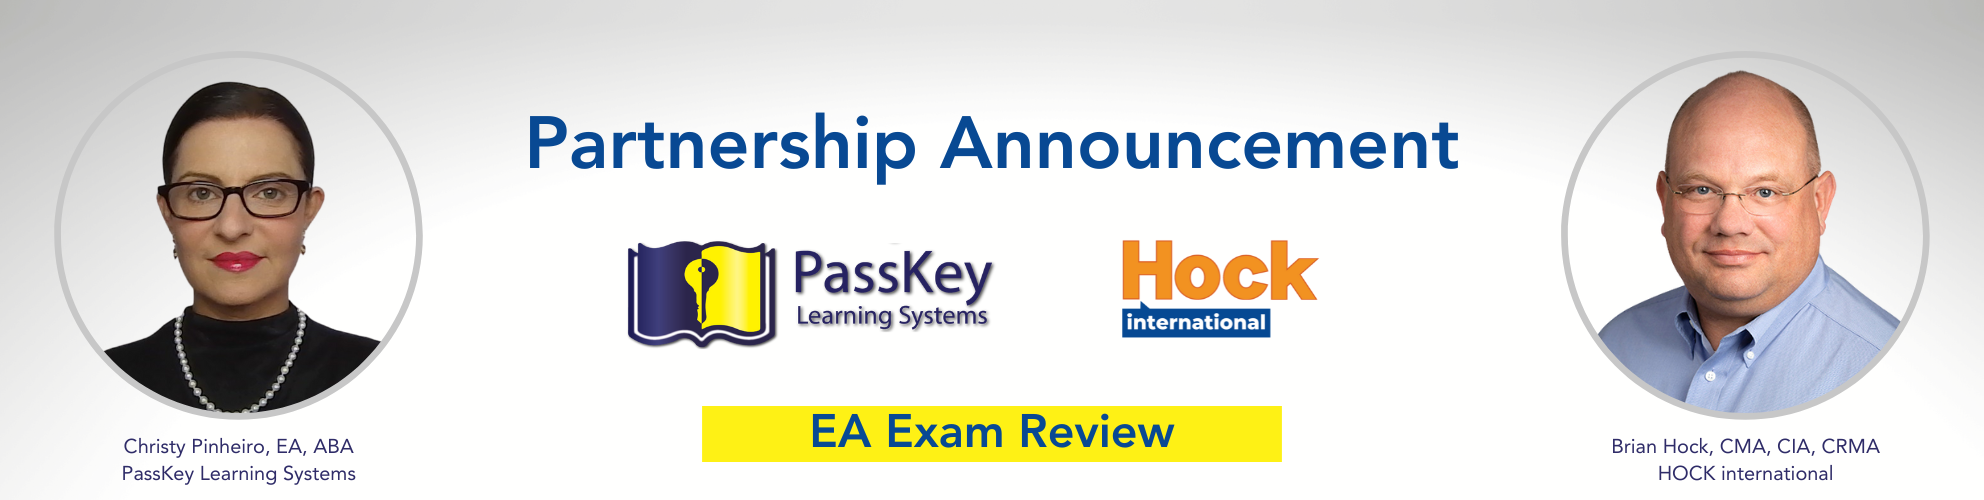 Partnership Announcement - HOCK and PassKey partner to provide EA Exam Review.